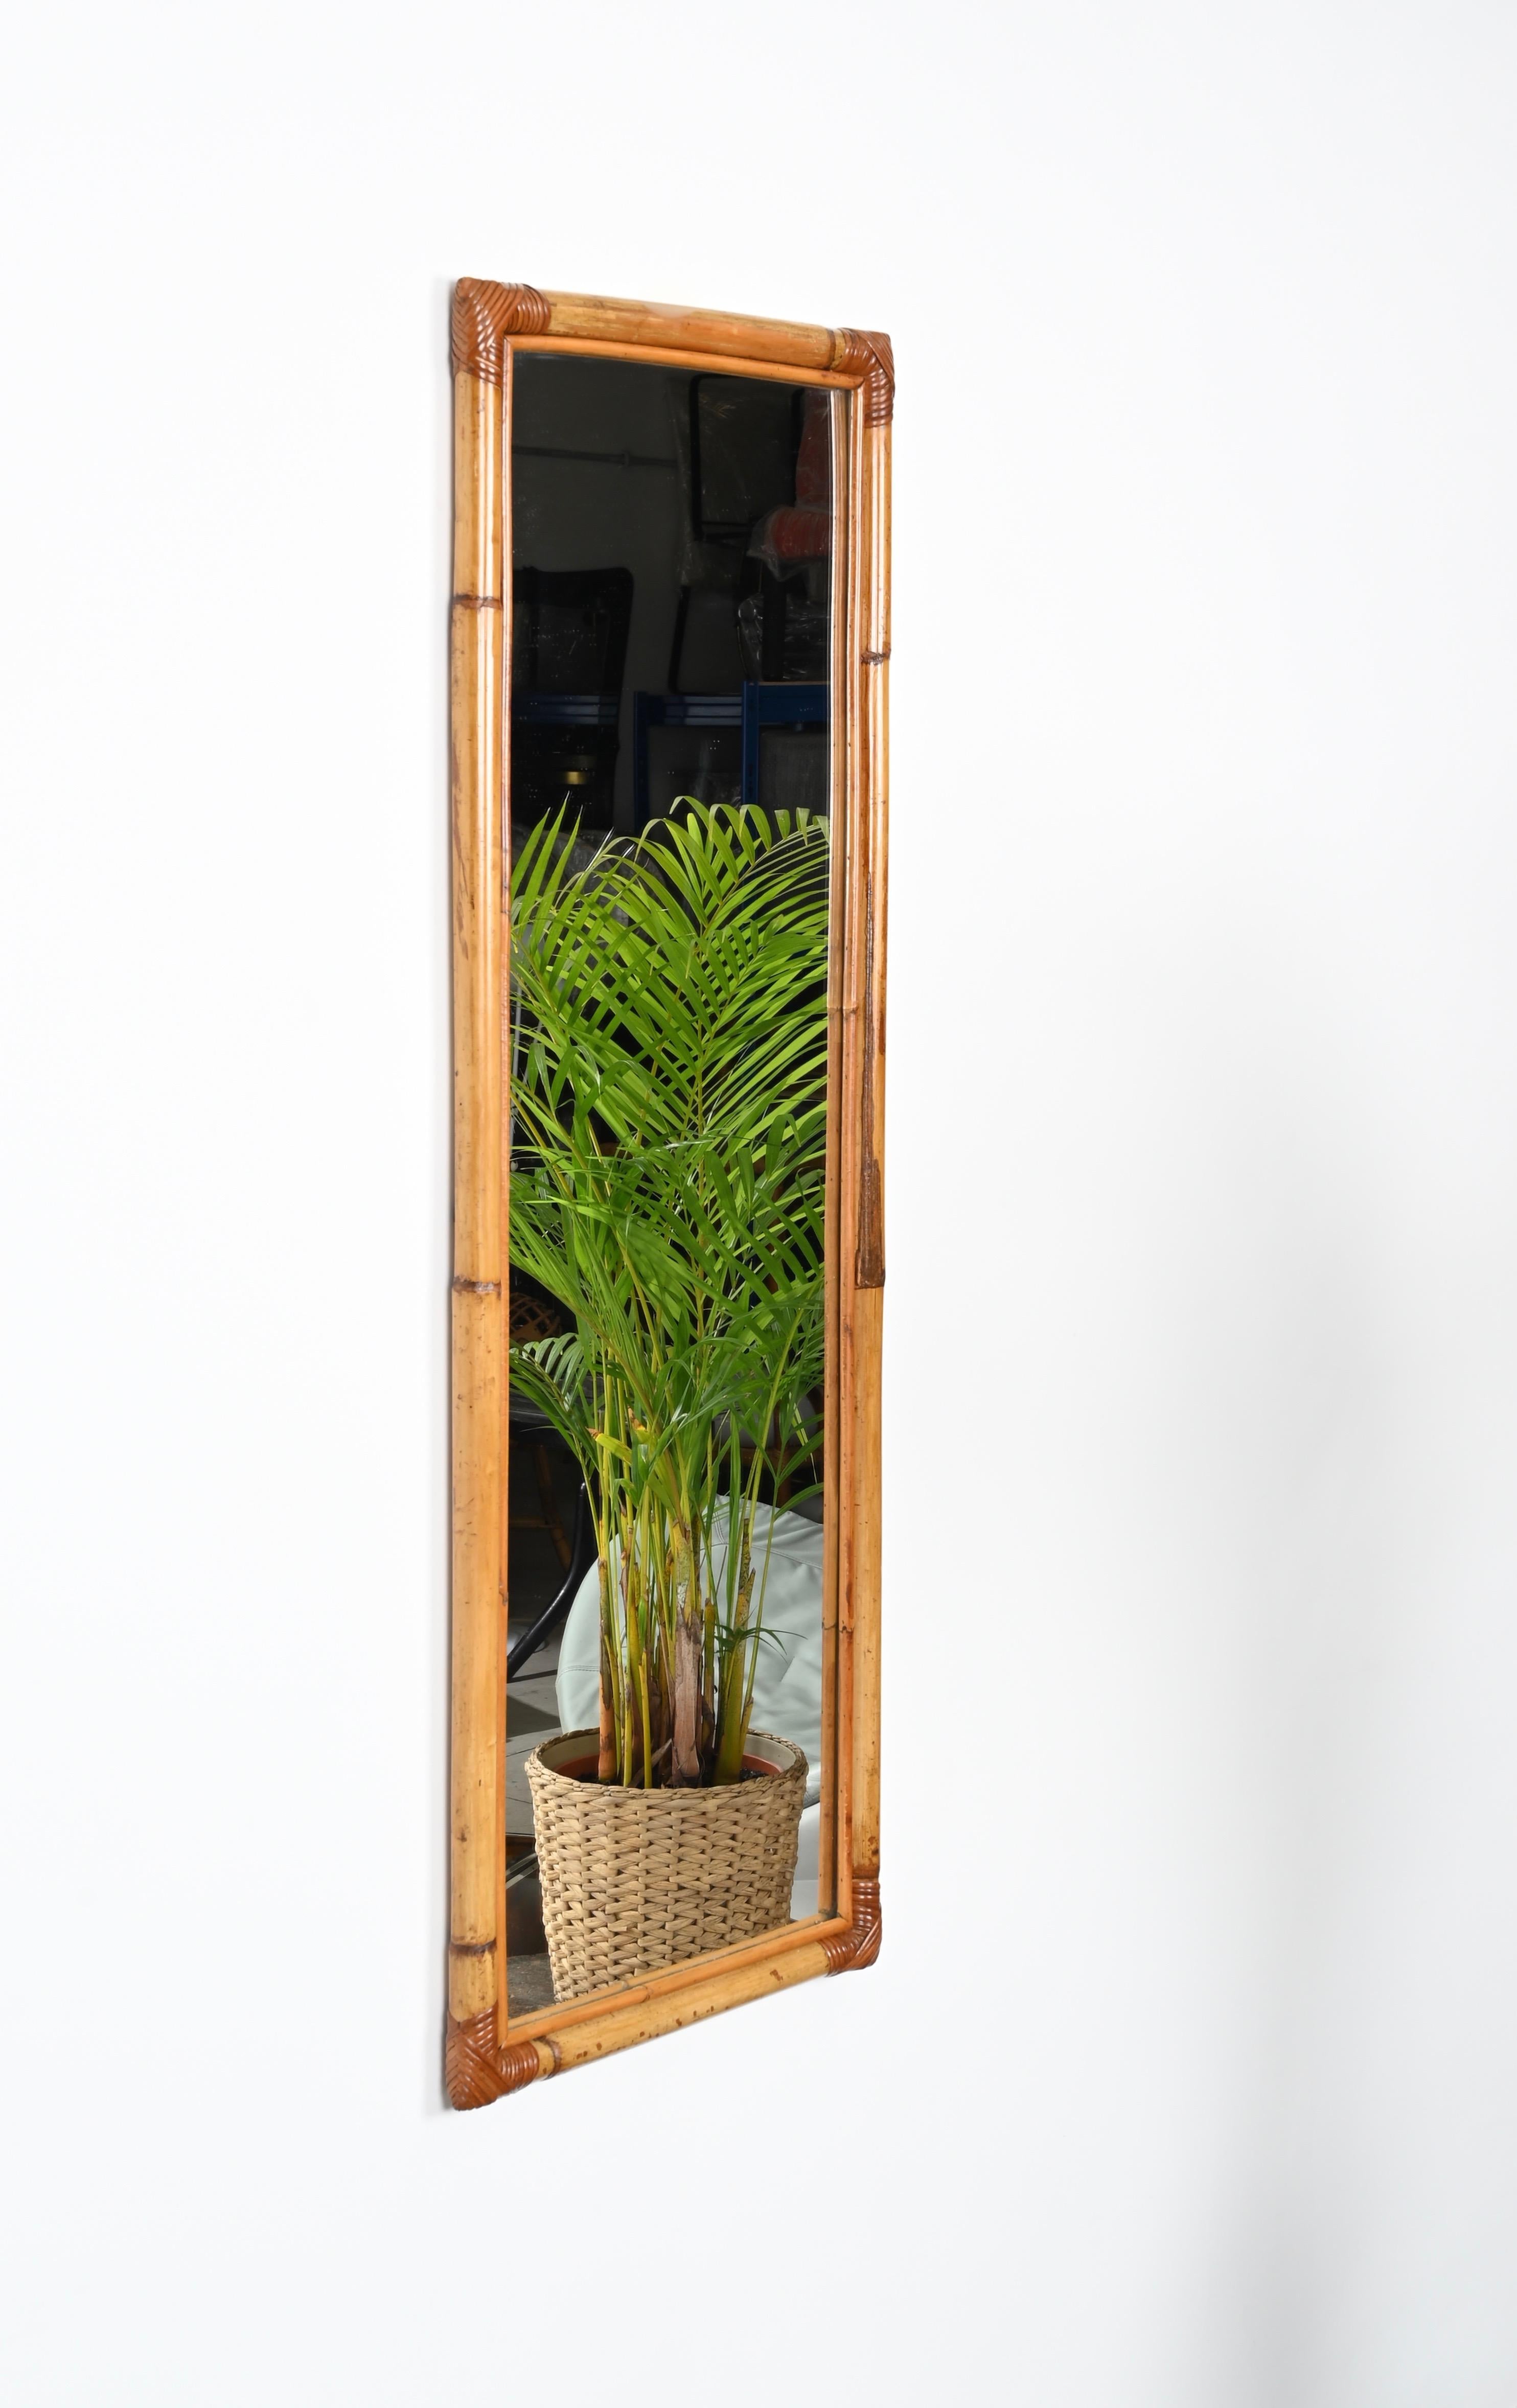 Gorgeous rectangular full-length midcentury mirror in bamboo and hand-woven wicker. This elegant organic mirror was designed in Italy during the 1970s. 

This sturdy mirror has a wonderful double frame in bamboo with the corners decorated with a